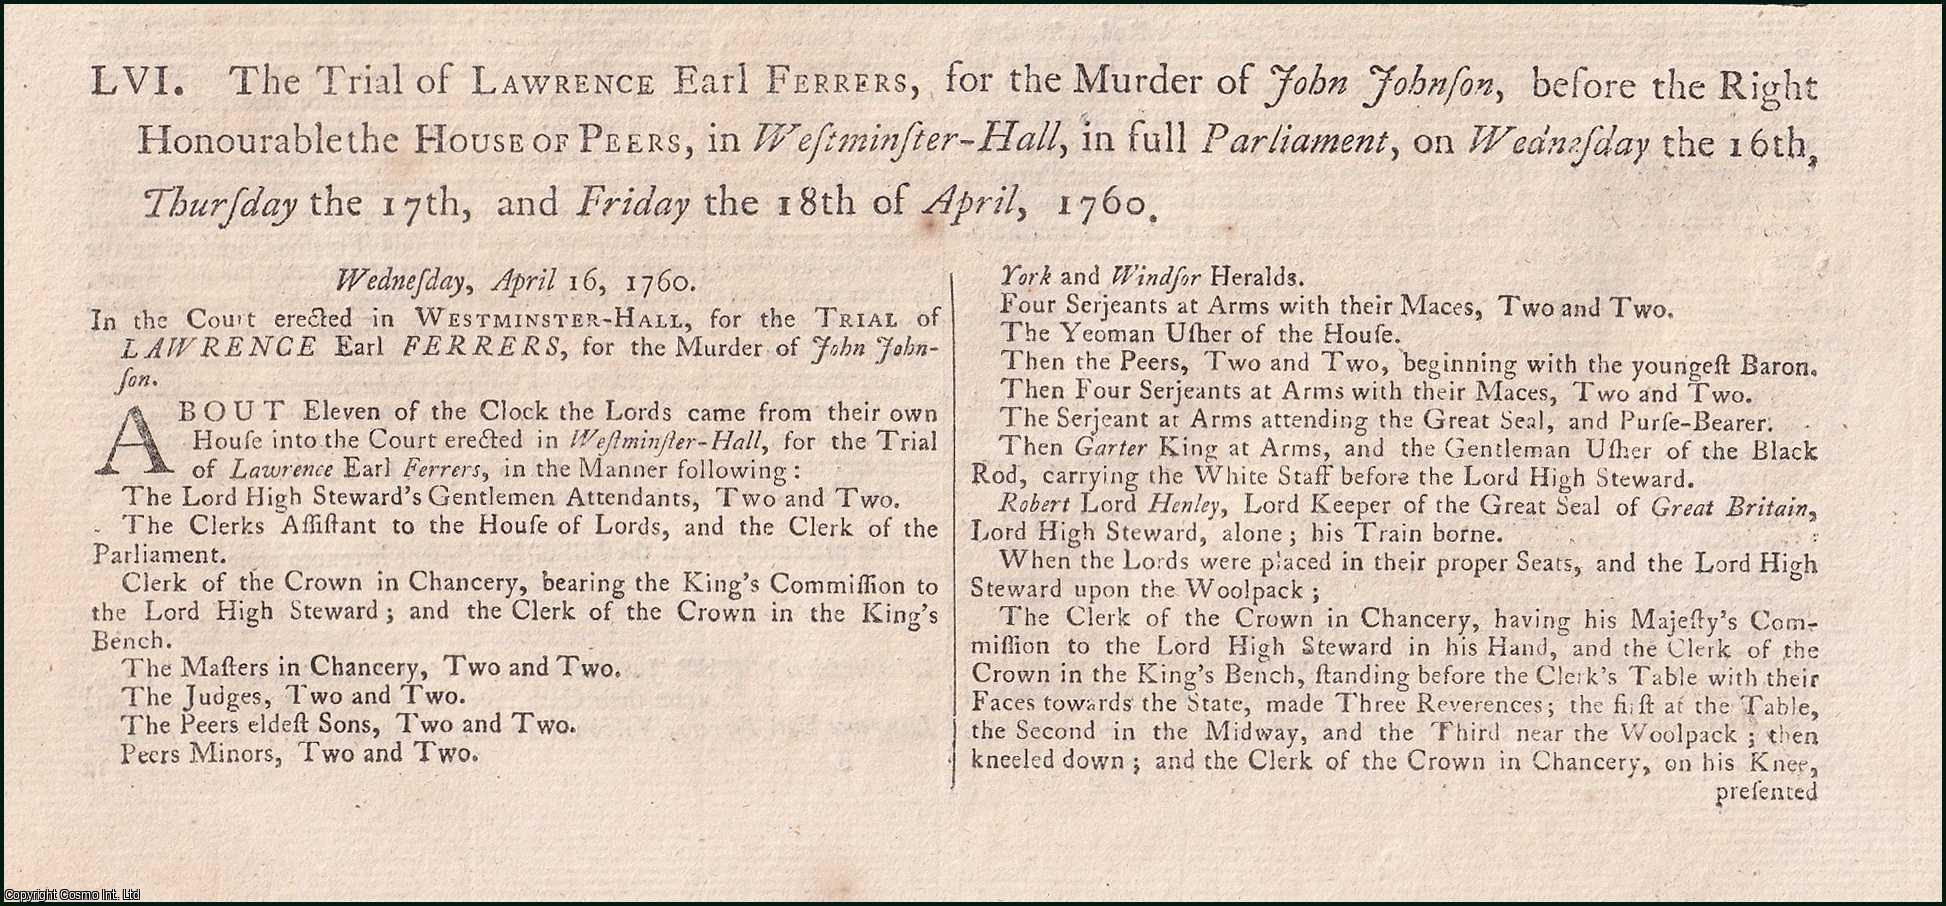 [Trial]. - The Trial of Lawrence Earl Ferrers, for the Murder of John Johnson, before the Right Honourable the House of Peers, in Westminster-Hall, in full Parliament, on Wednesday the 16th, Thursday the 17th, and Friday the 18th of April, 1760. An original report from the Collected State Trials.